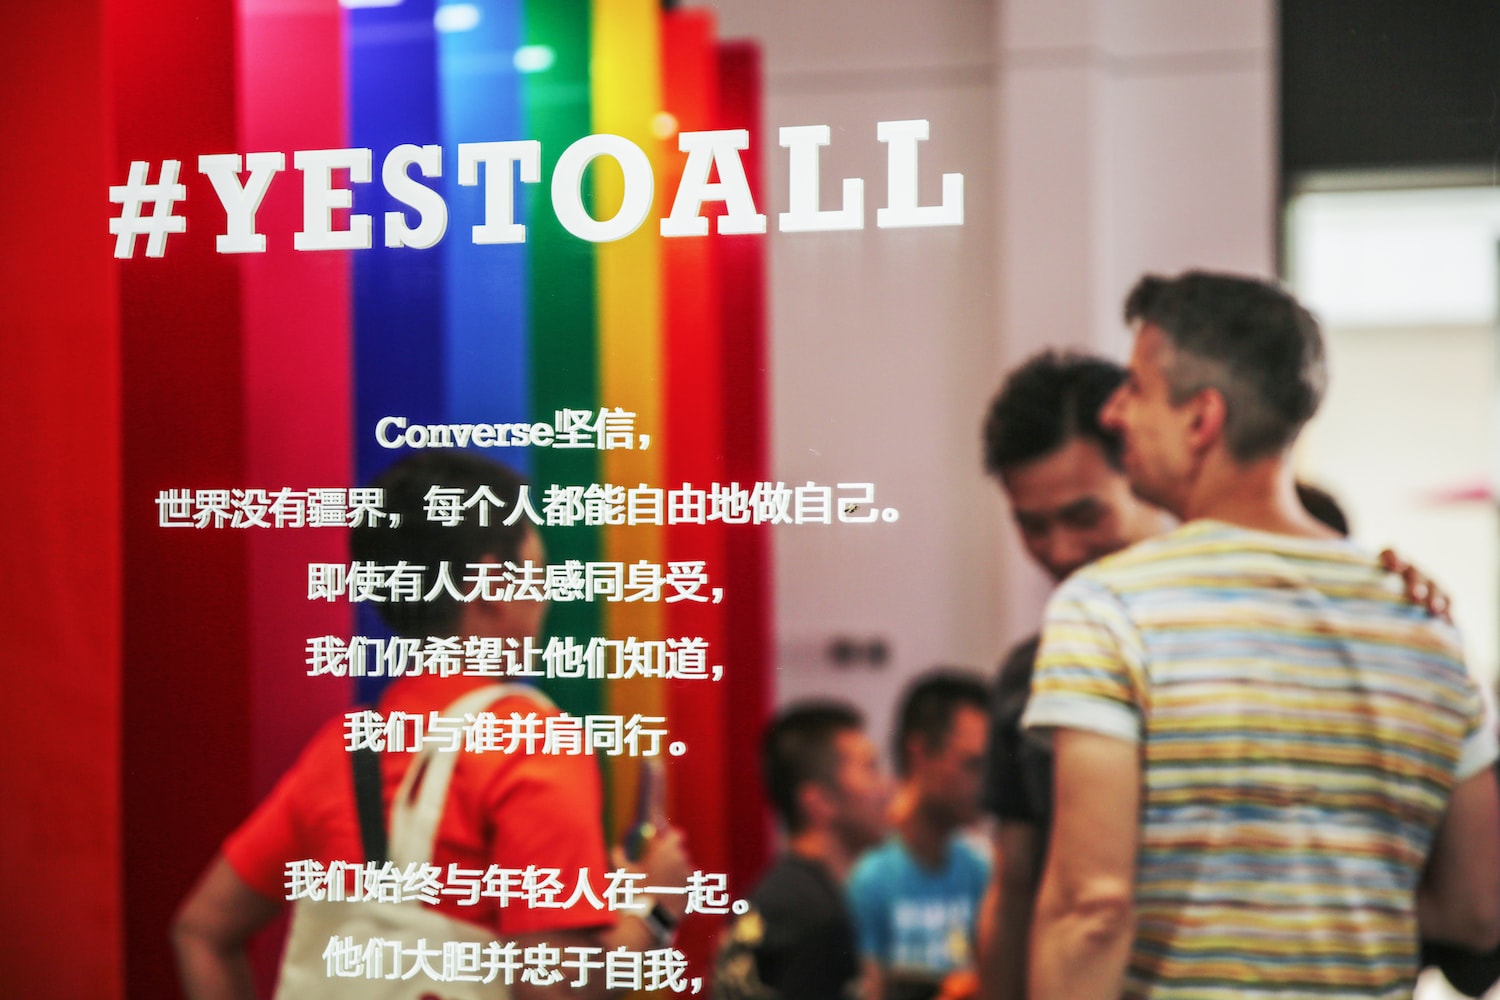 Converse “YES TO ALL” Shanghai Pop-Up